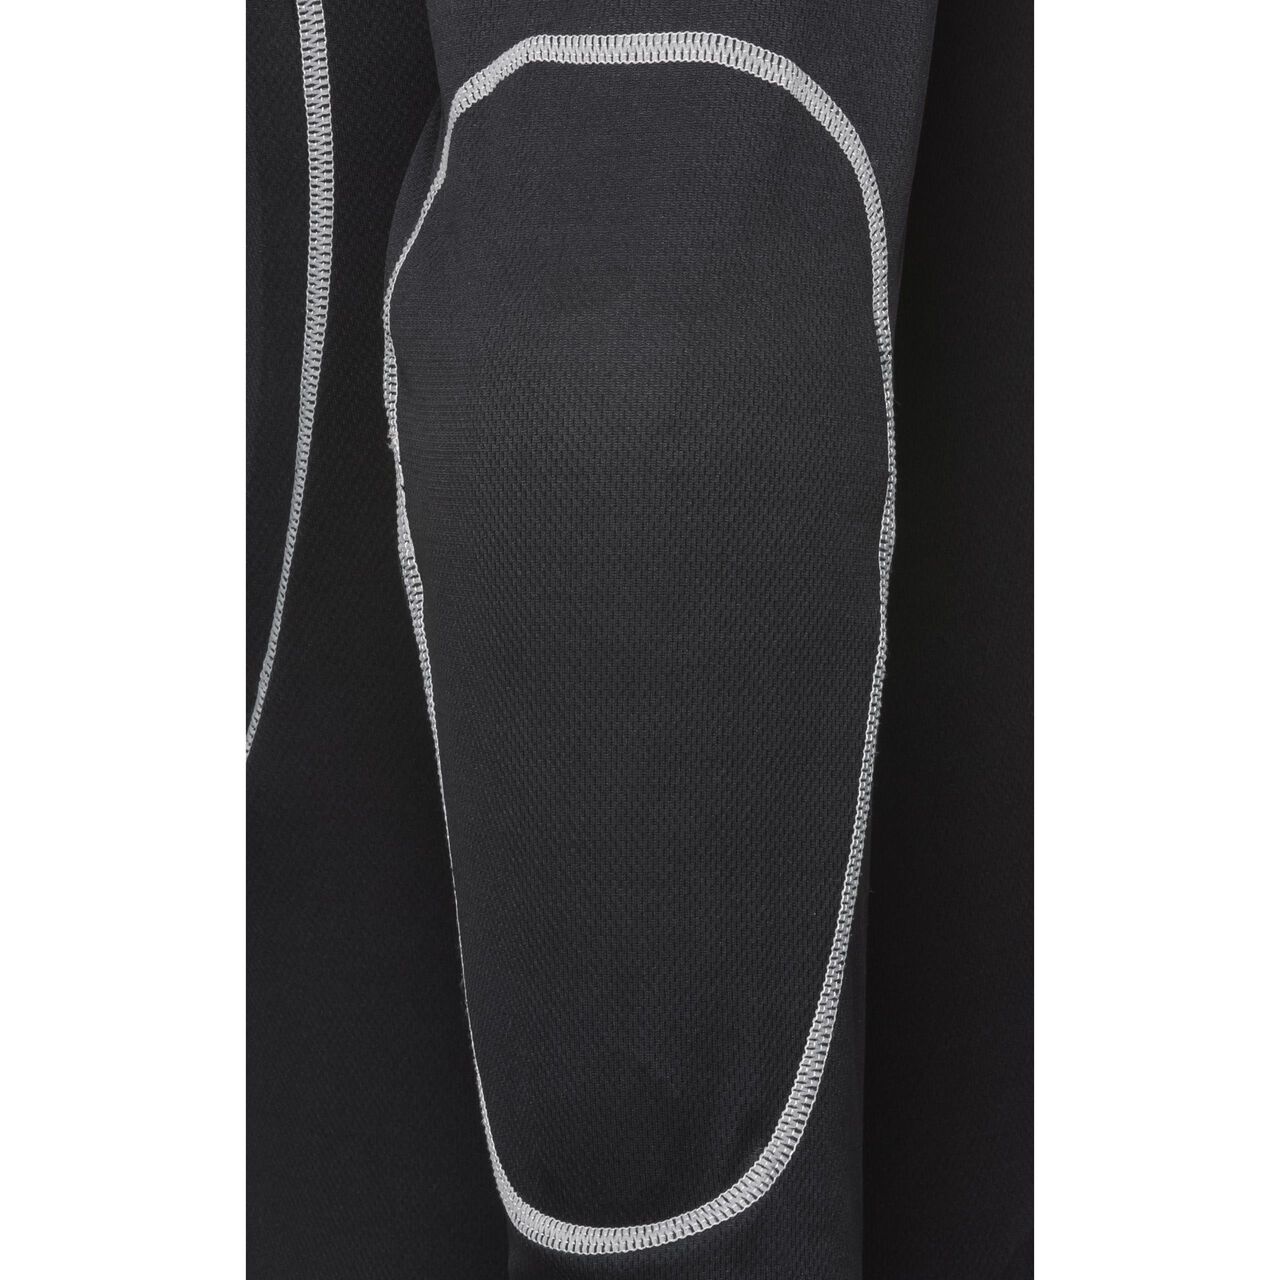 Underjacket with joint protectors 3.0 black